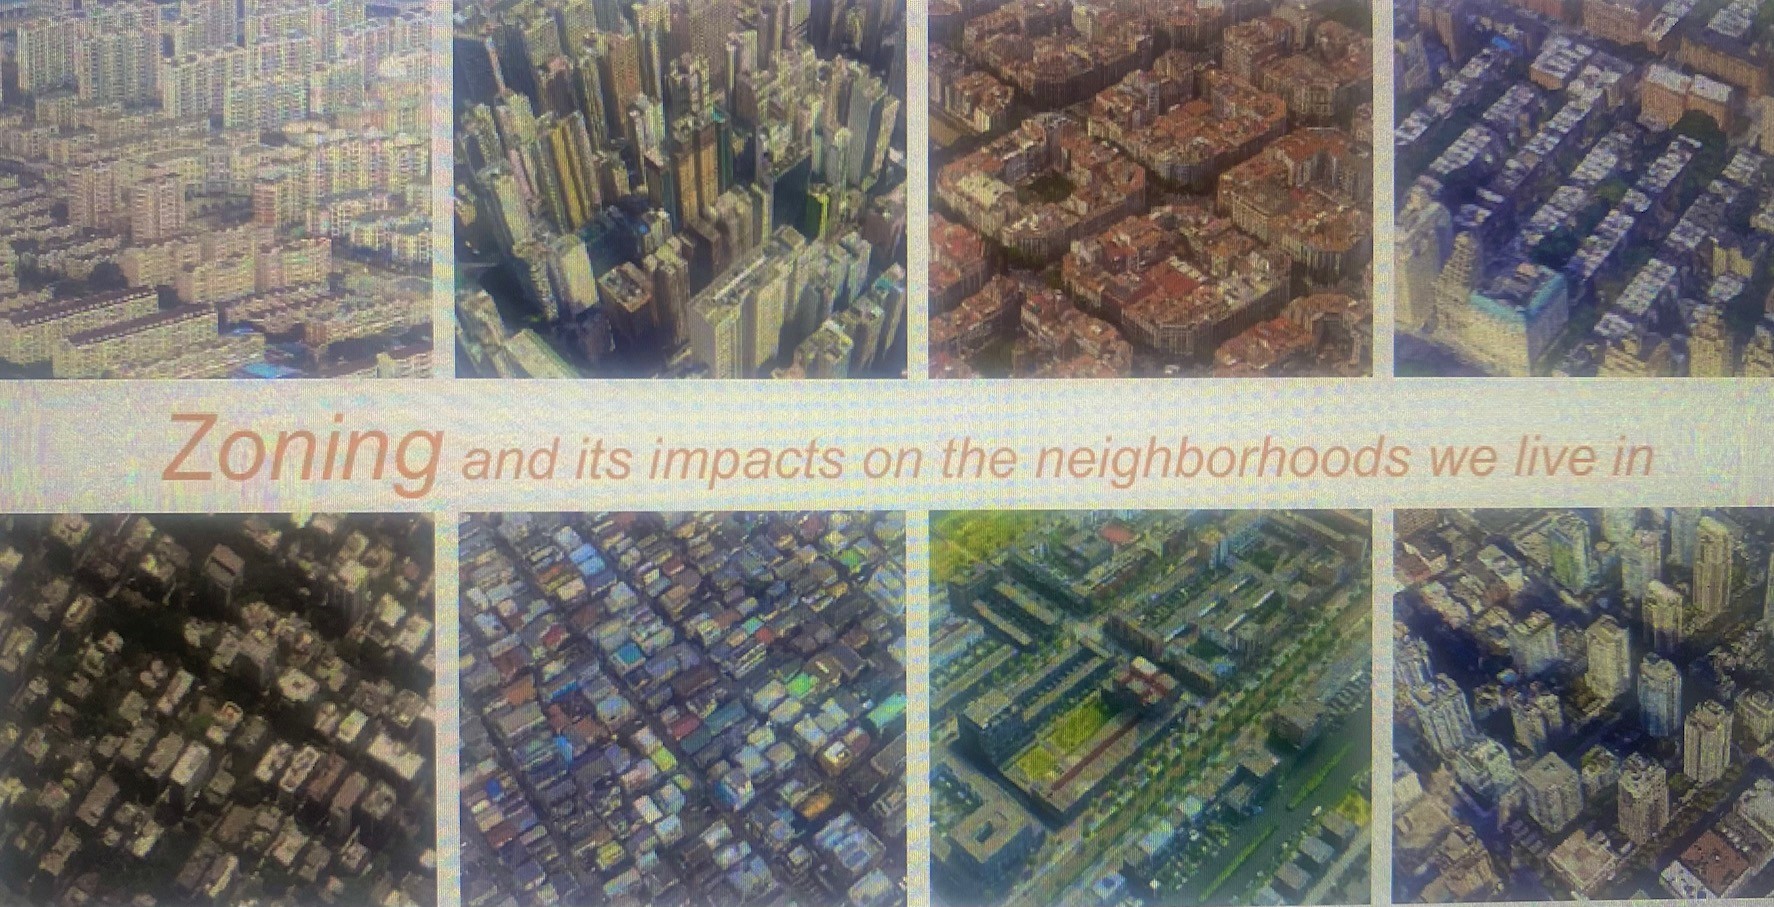 Kate Dunham on Zoning and its impact on the neighborhoods we live in